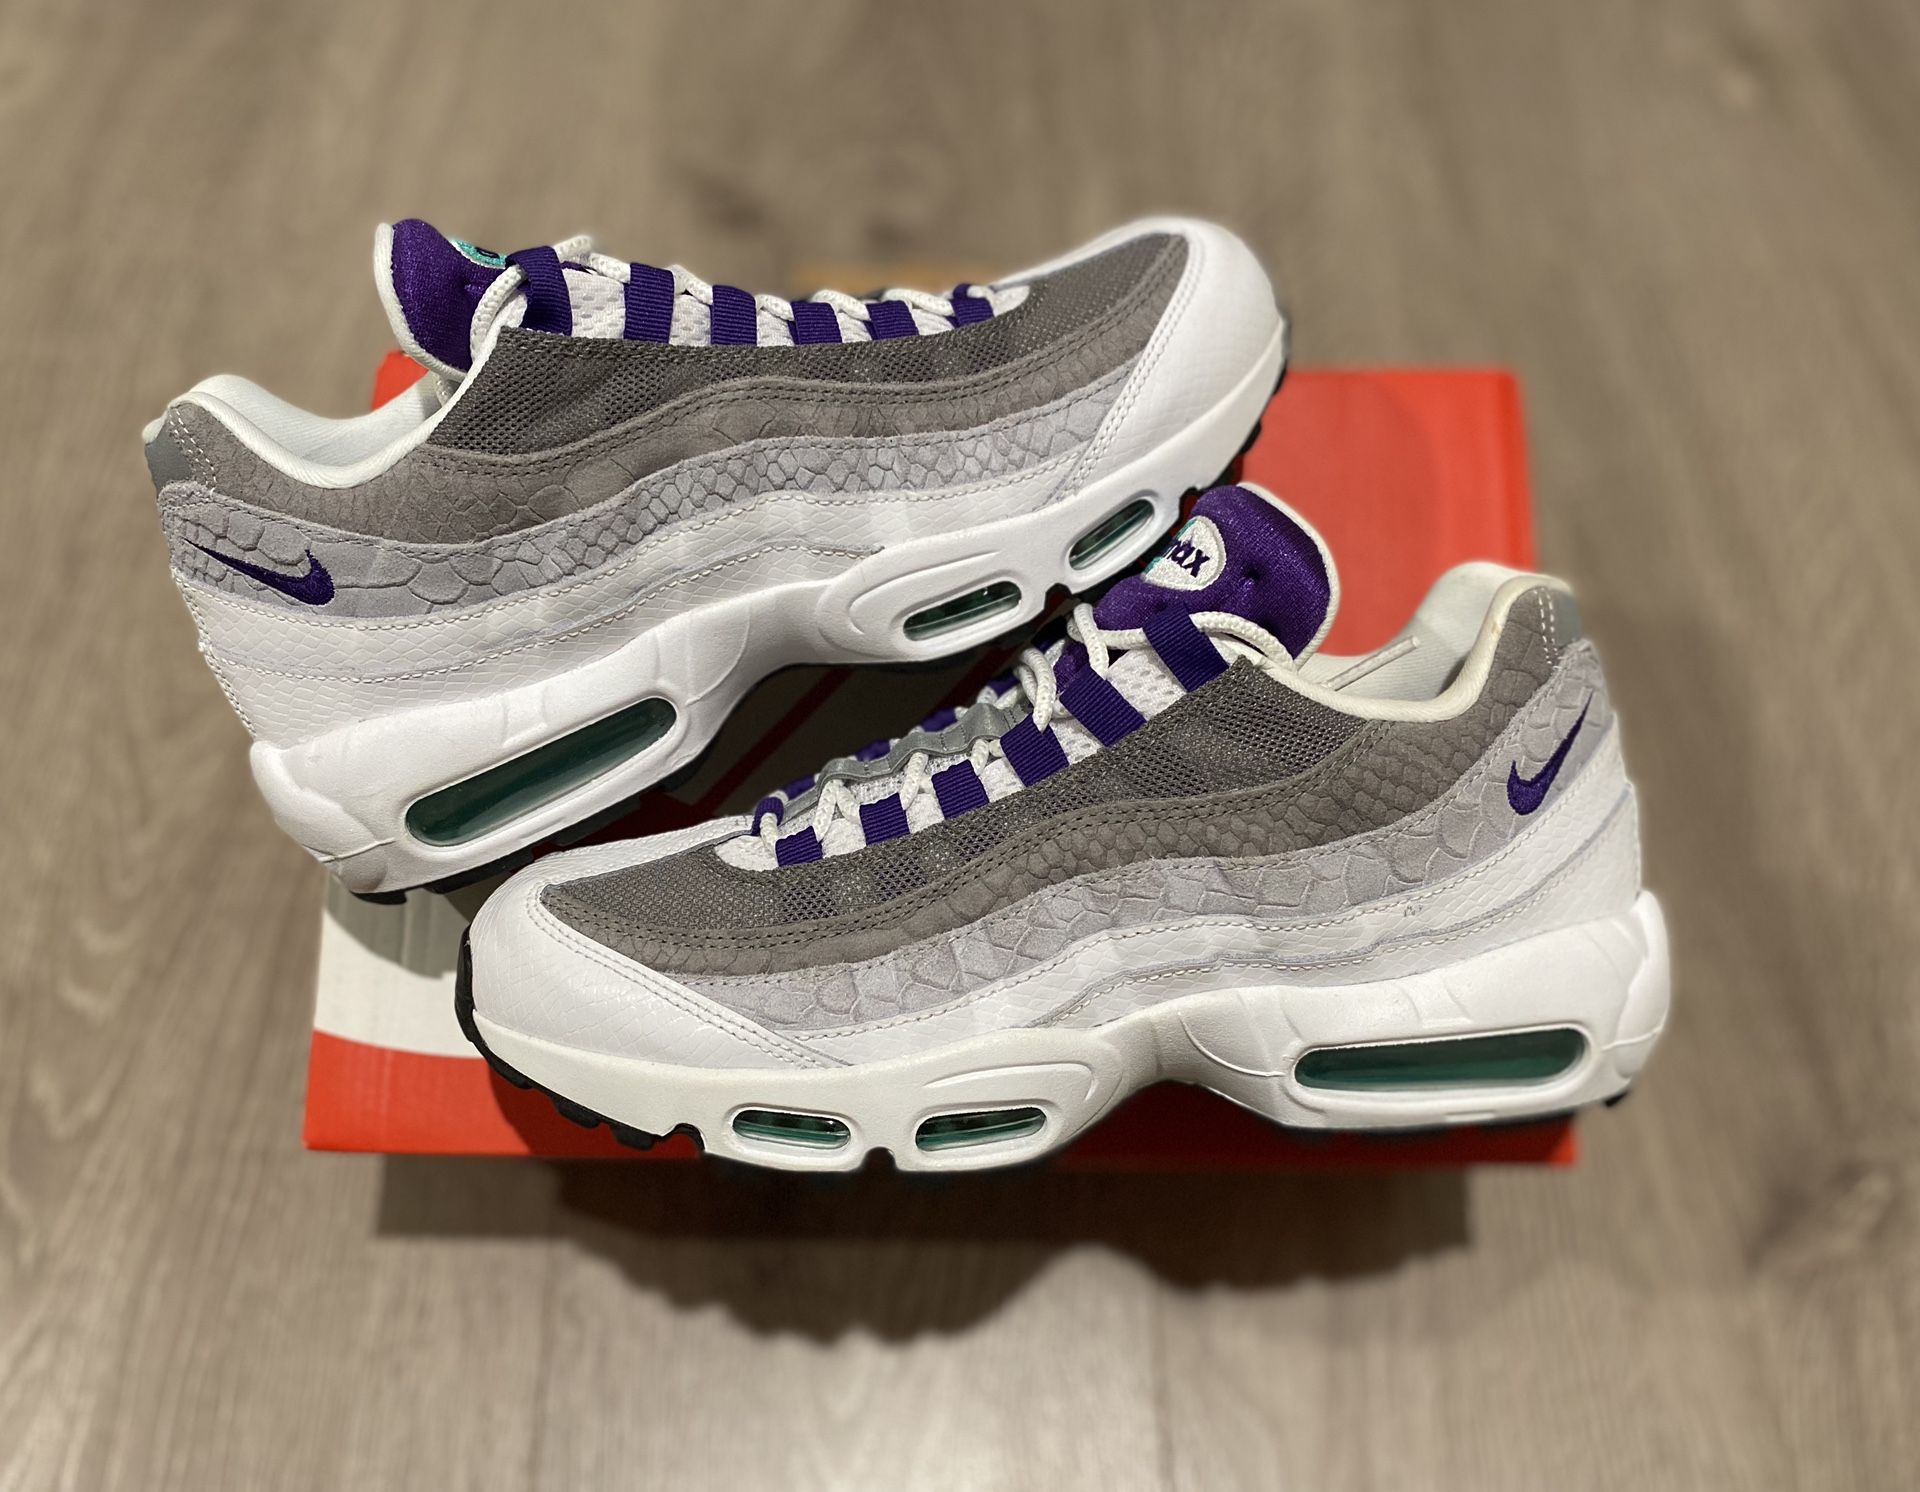 Air Max 95 Grape Snakeskin Size 8.5 and 9 Men’s